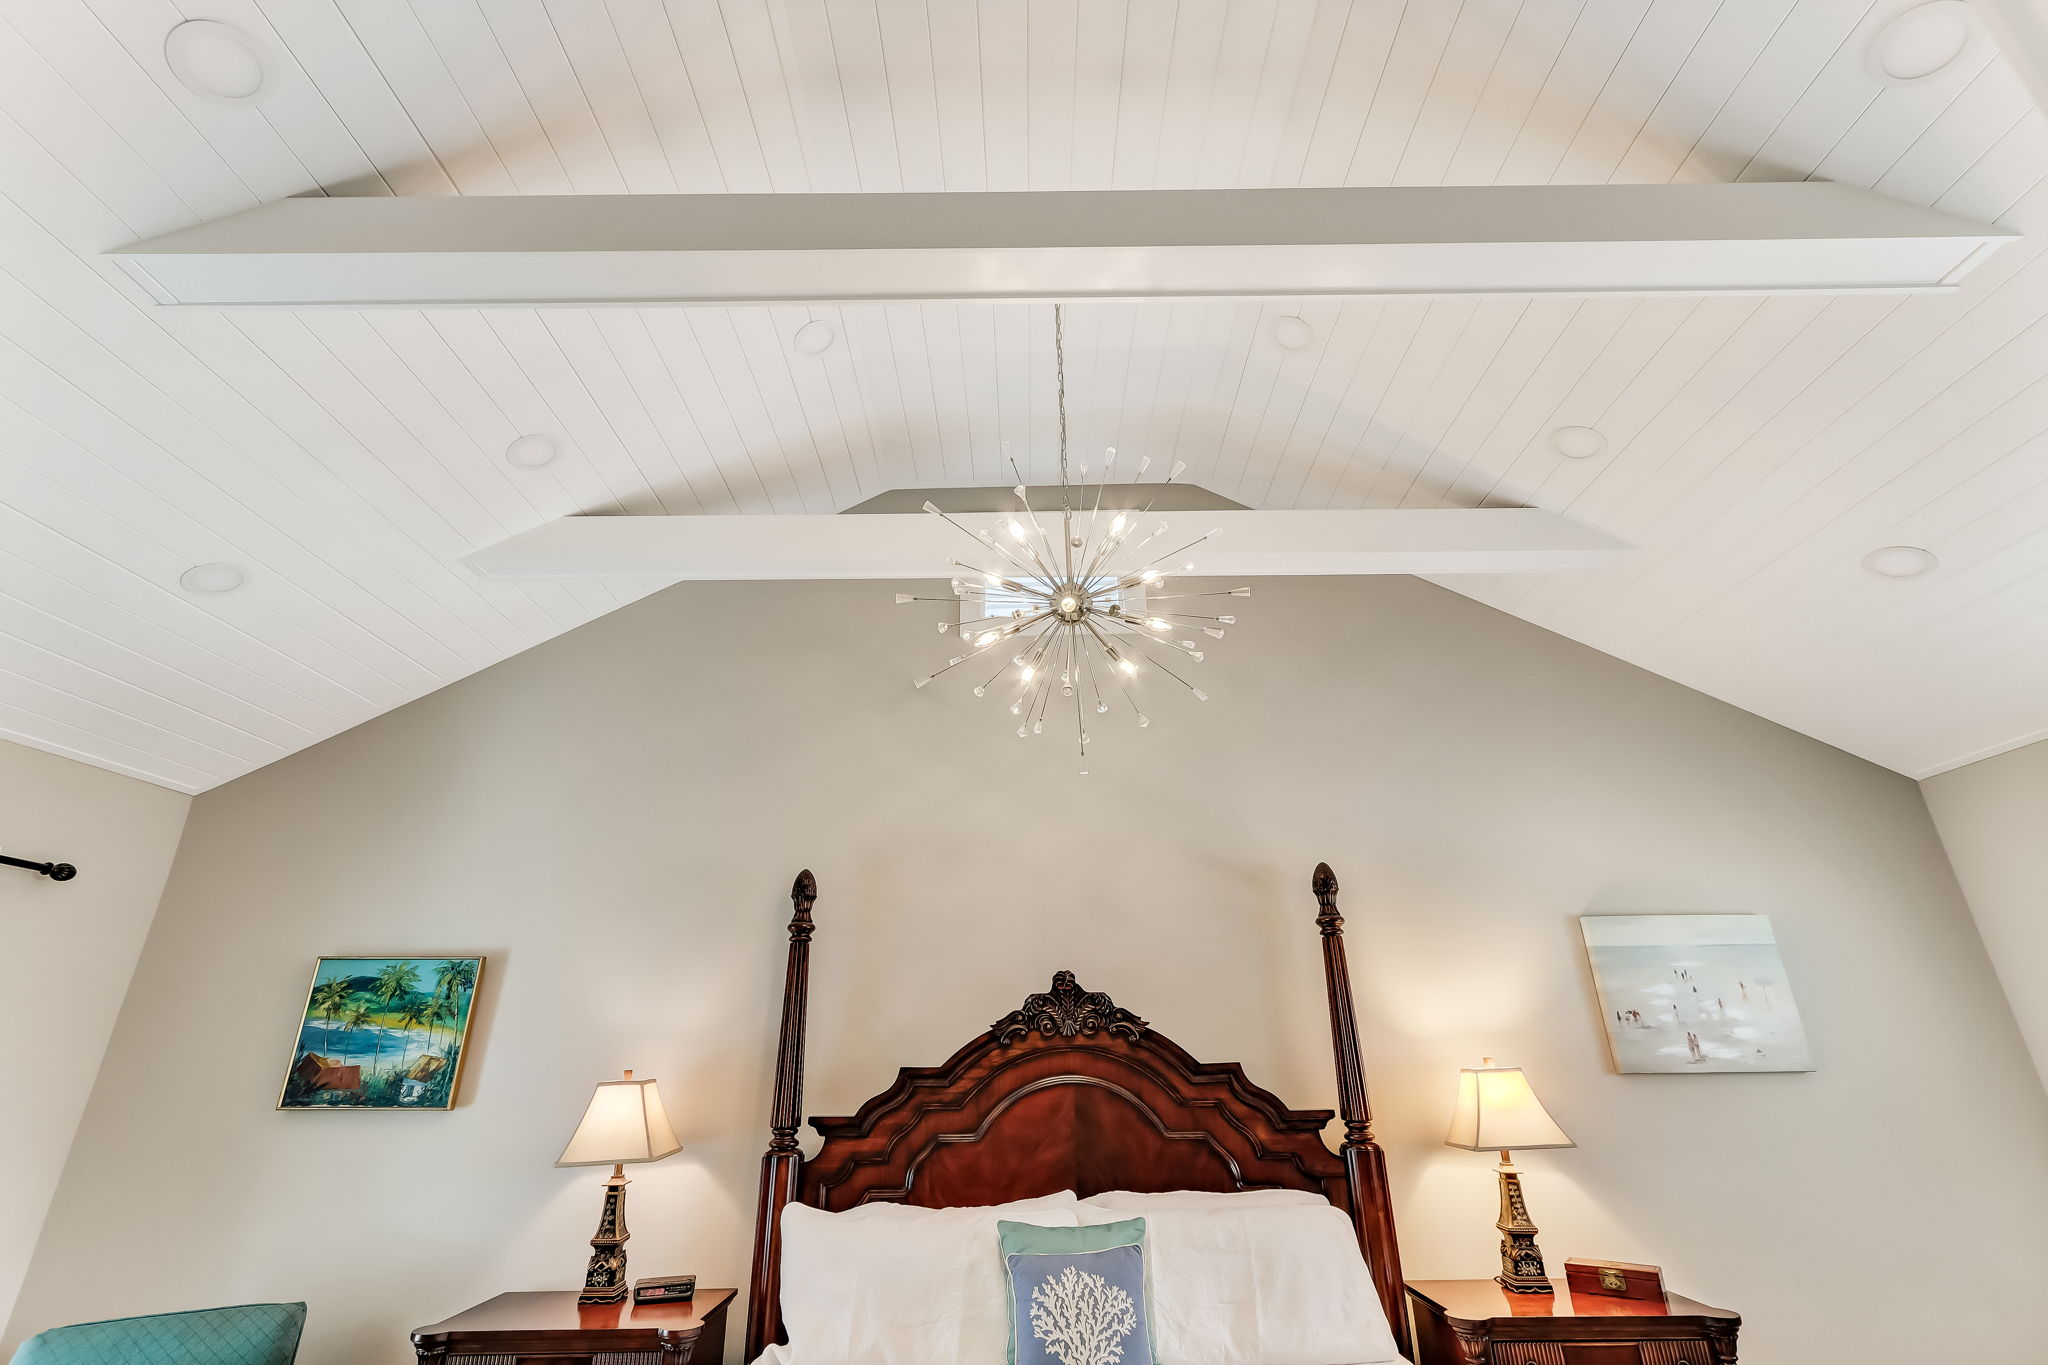 Vaulted Shiplap & Beamed Ceiling